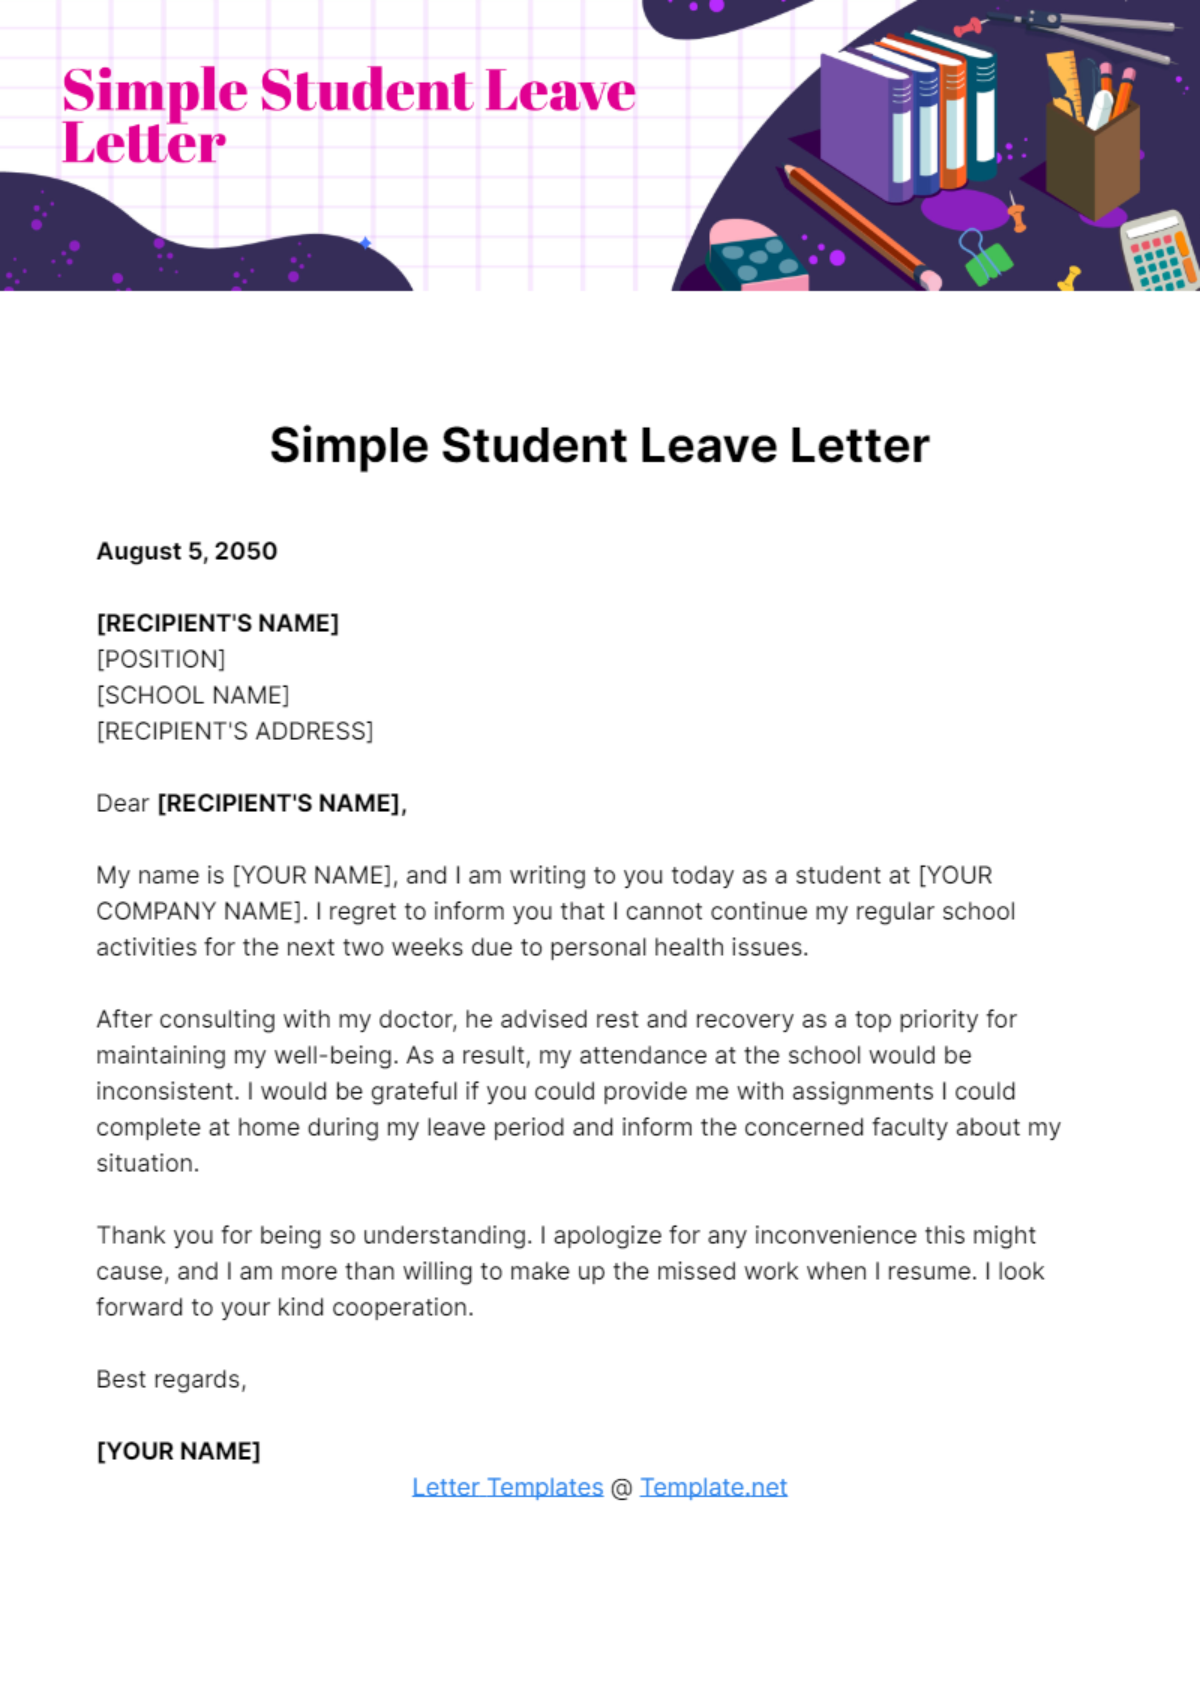 Simple Student Leave Letter Template